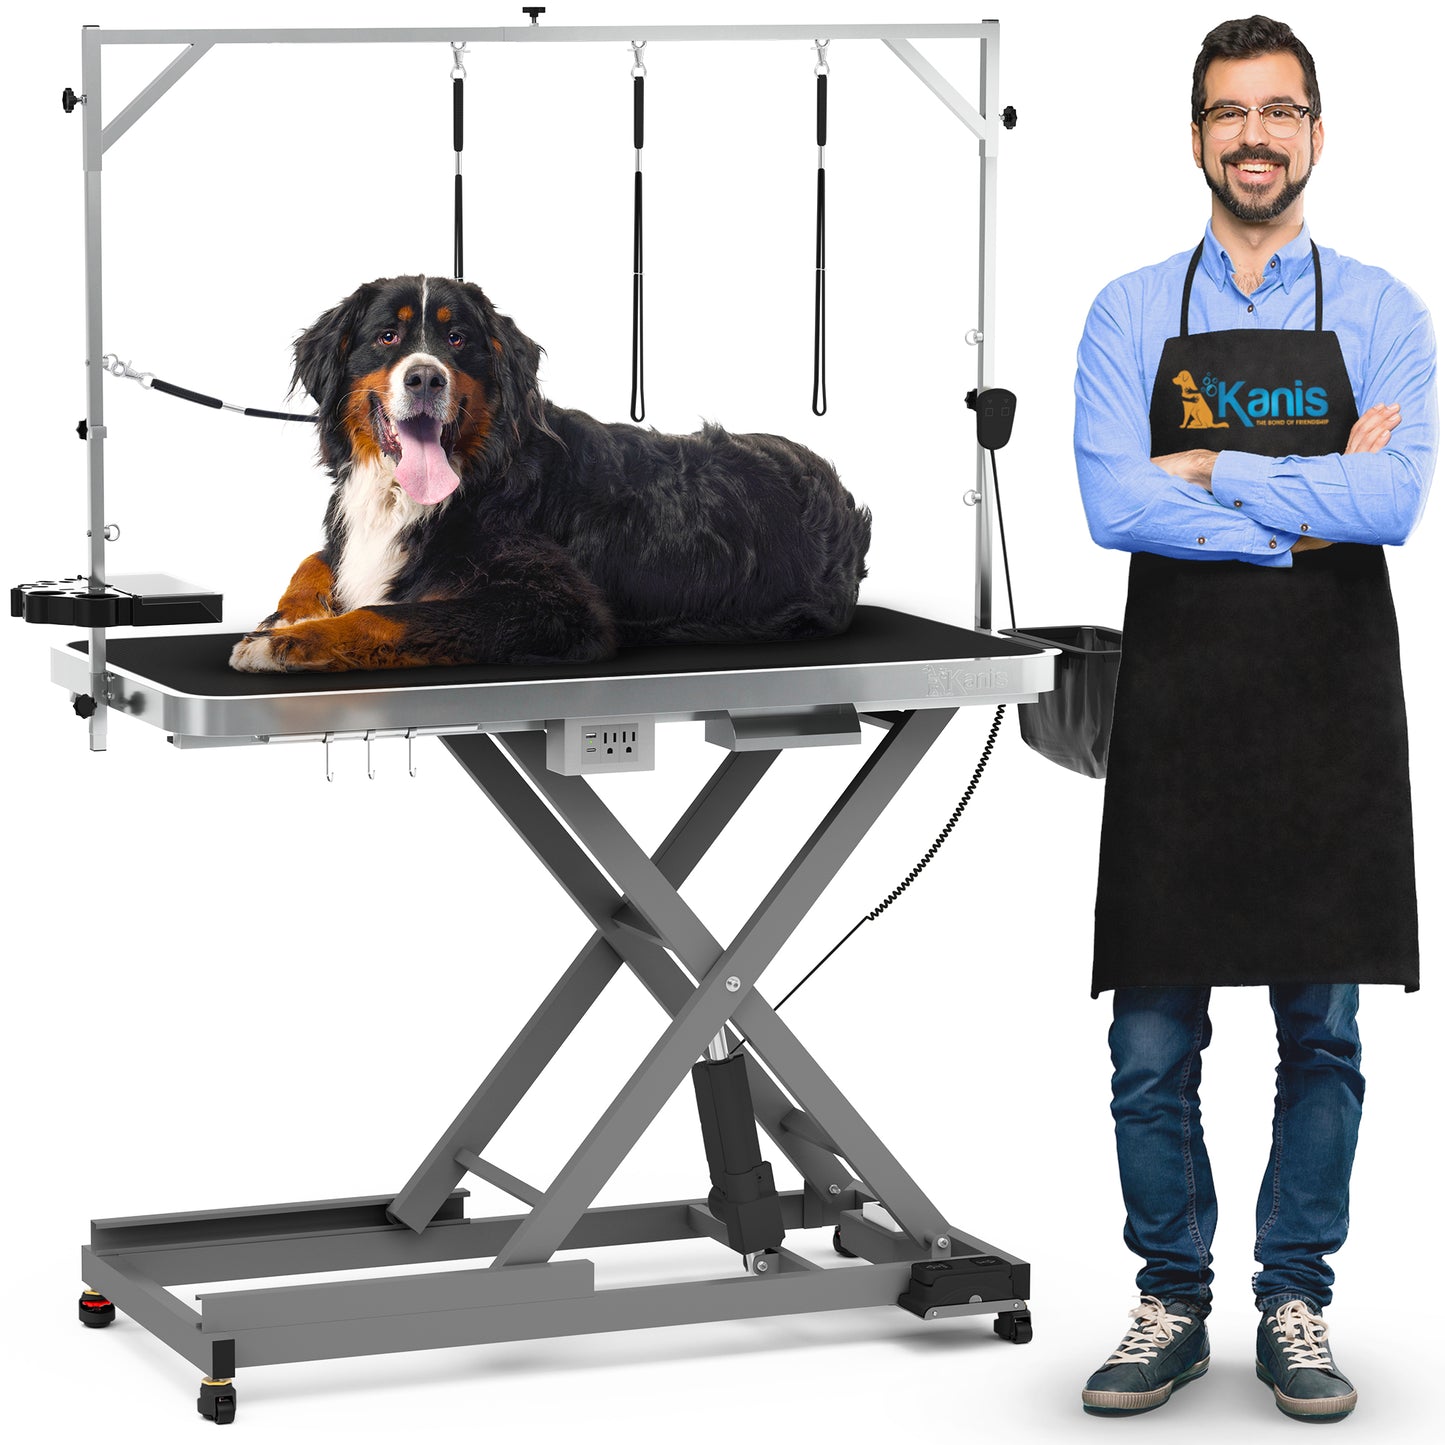 KANIS - Professional Electric Dog Grooming Table - Heavy Duty, Height Adjustable Pet Grooming Table w/Hand & Foot Control, Circuit Breaker, Leveling Wheels, Dog Grooming Arm, Reversible Anti Slip Tabletop & Tool Organizer/Dog Grooming Station